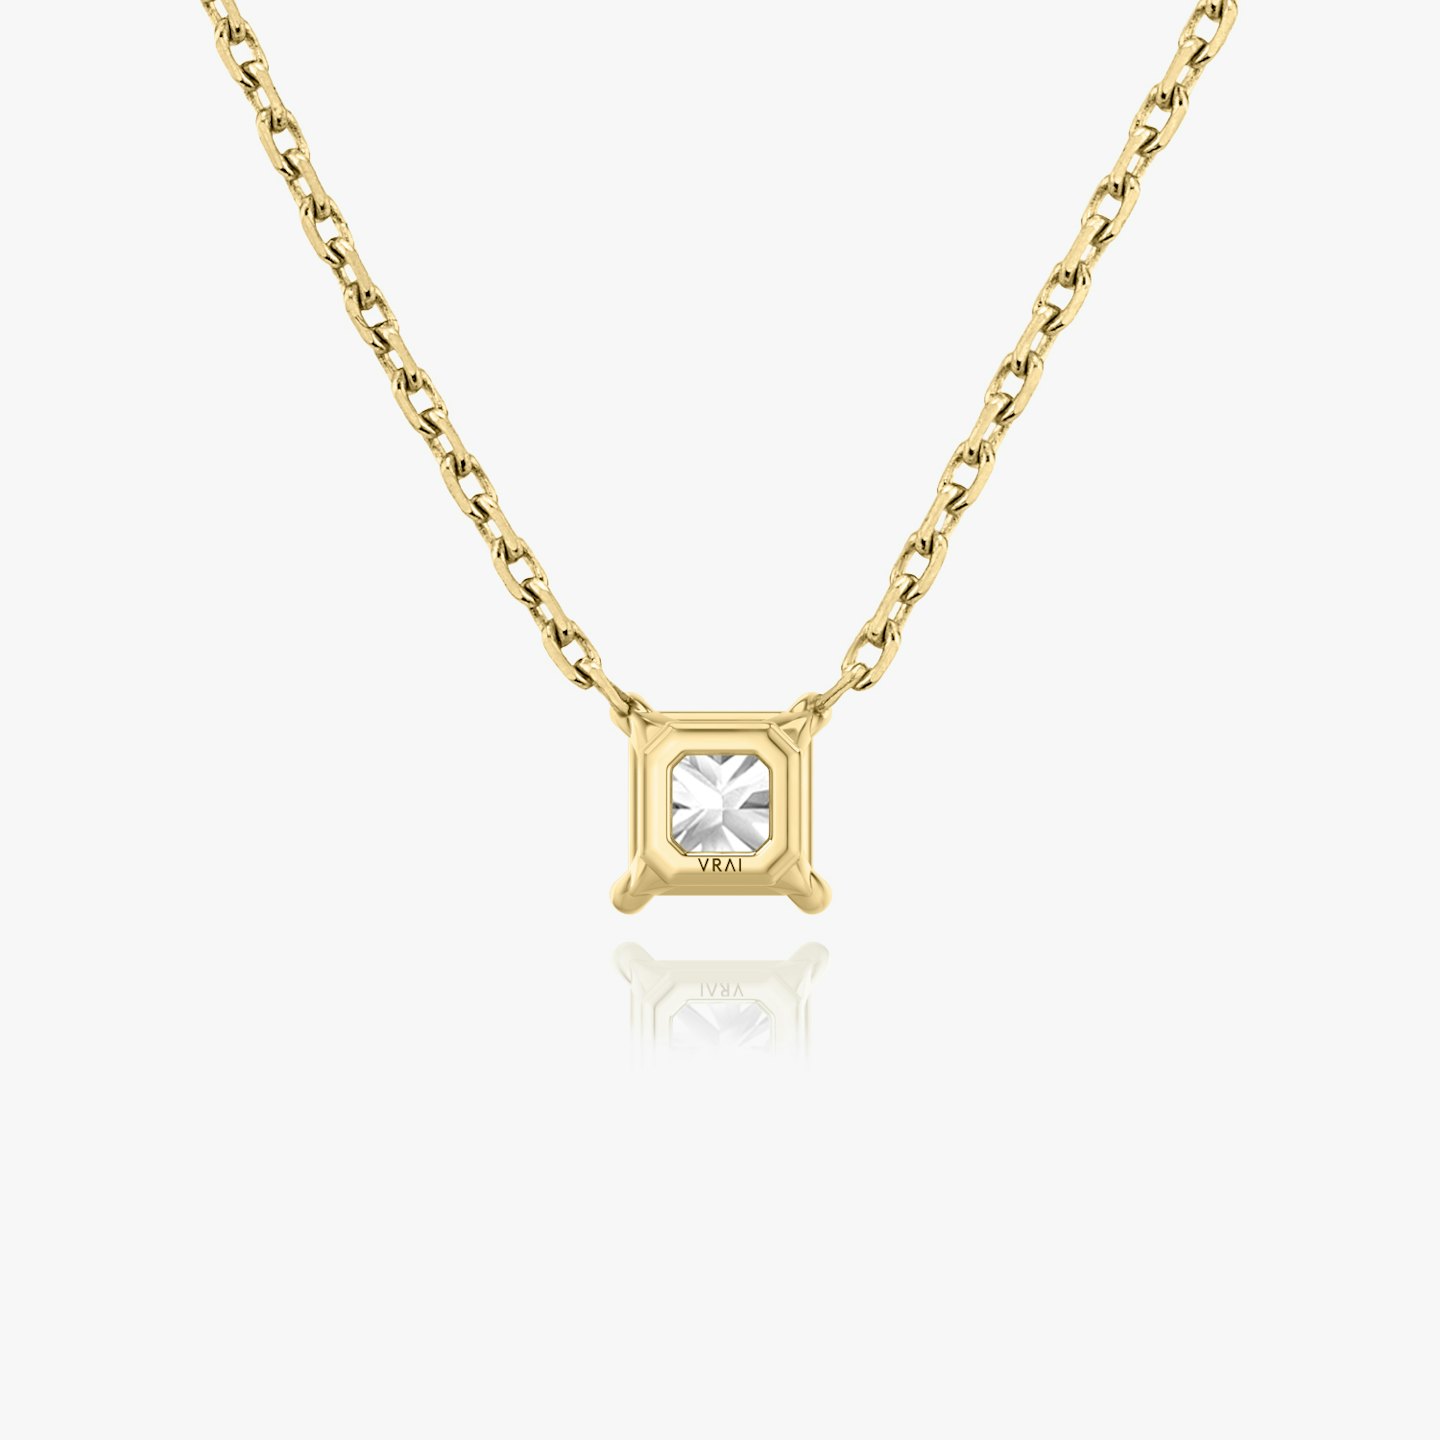 Princess cut diamond necklace in yellow gold back view